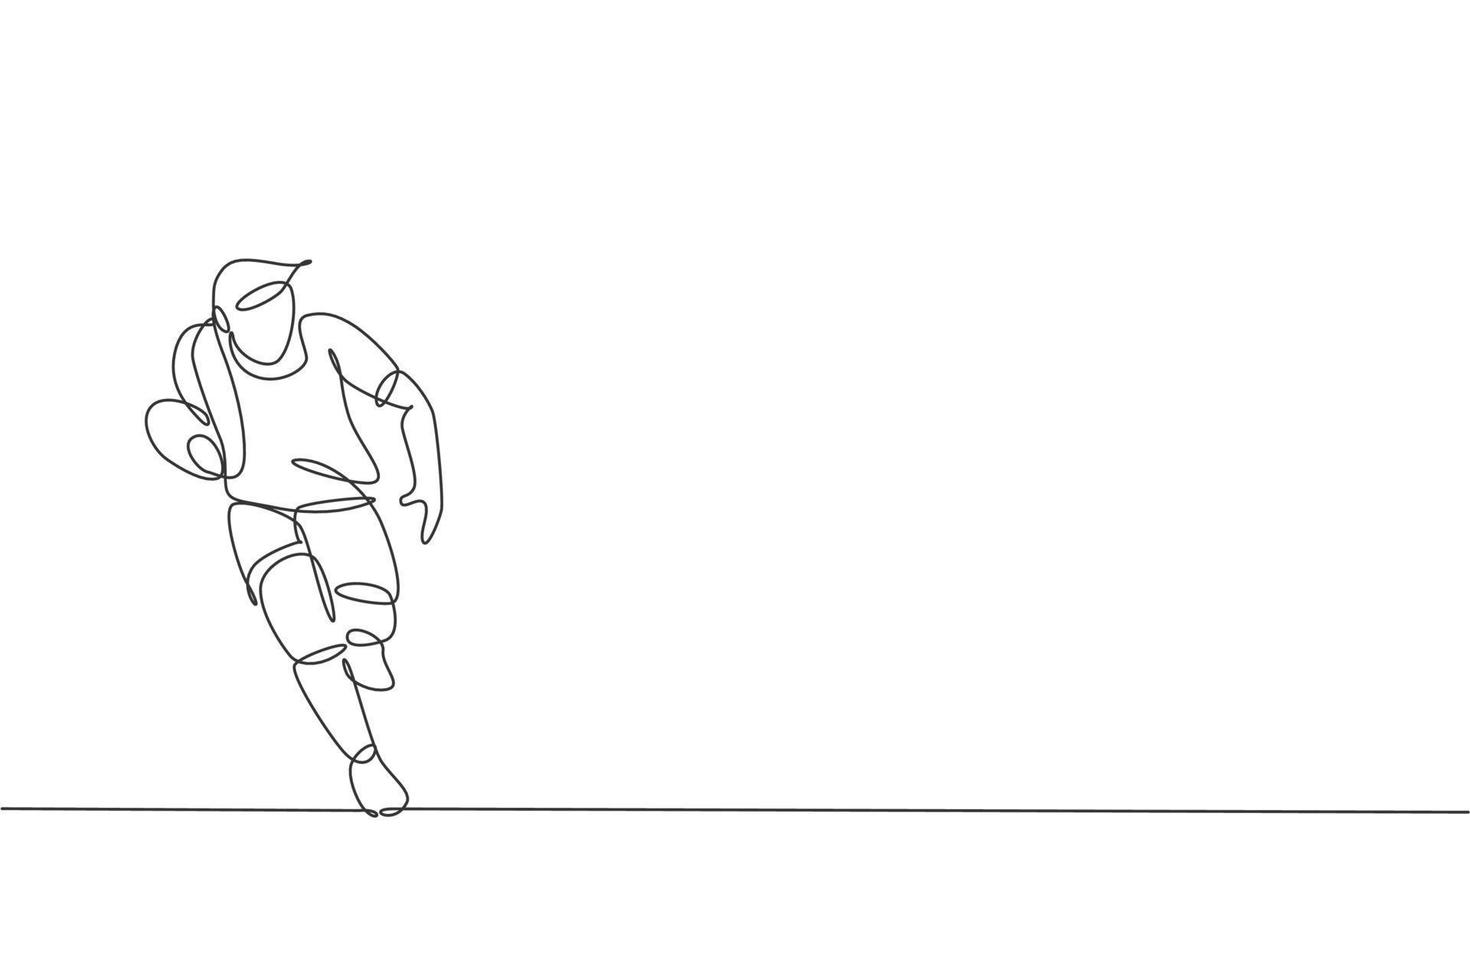 Single continuous line drawing of young agile rugby player running to avoid rival. Competitive sport concept. Trendy one line draw design vector illustration for rugby tournament promotion media